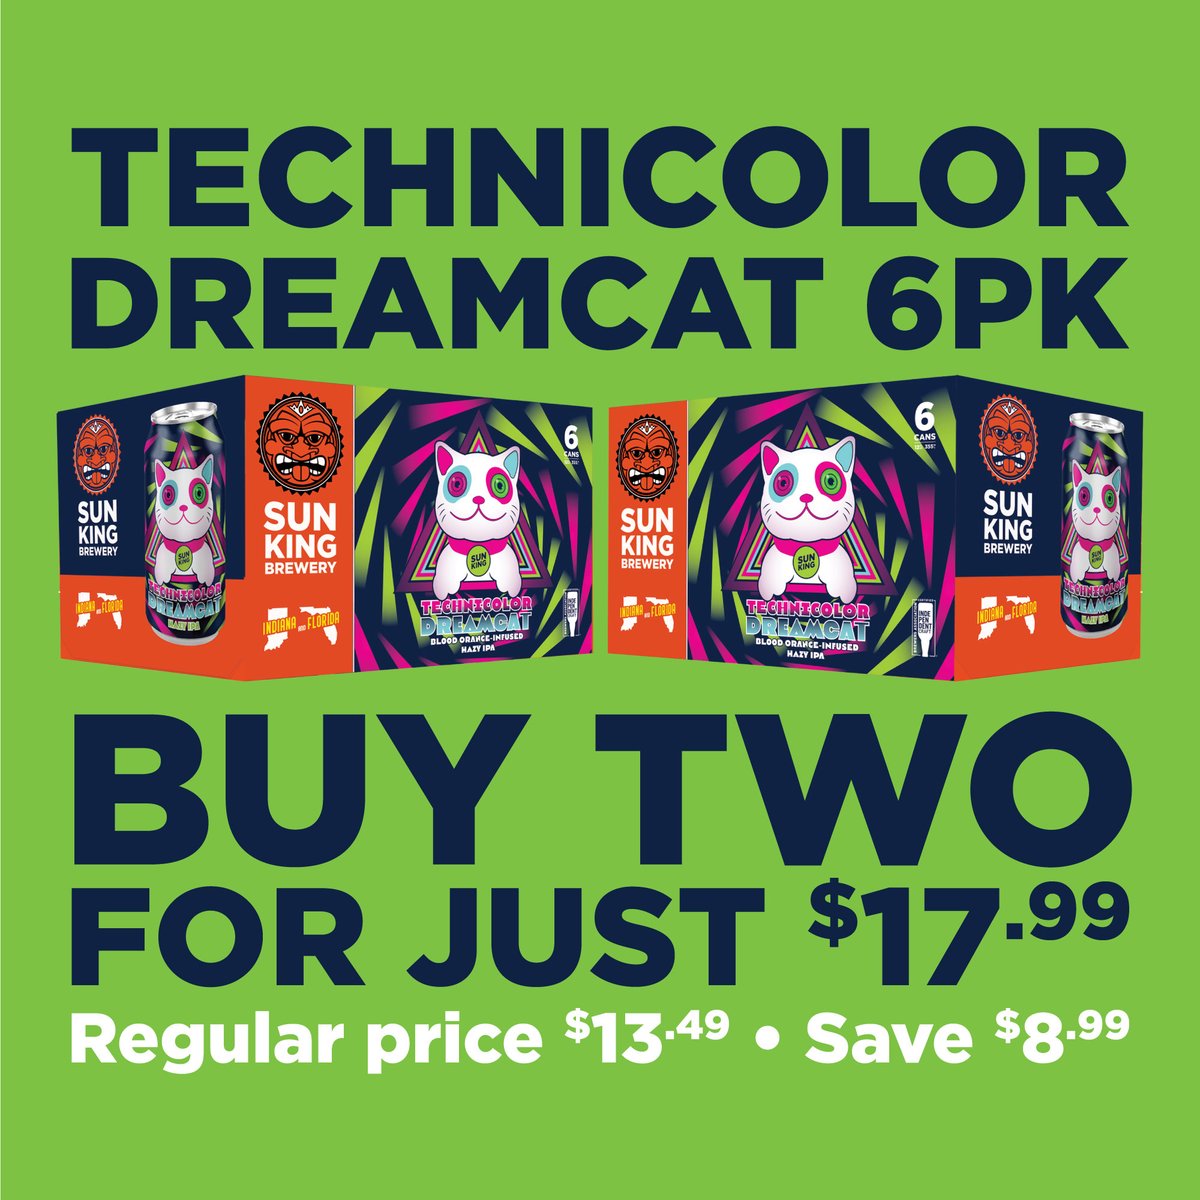 💰 Save Big & Sip Bold! 🍻 Score a holiday win w/ our special offer: Get 2 6-pks of Technicolor Dreamcat for just $17.99! 🎉 That's a jaw-dropping $8.99 in savings, giving you more moola to fill those stockings w/ extra goodies. It's the season of giving and saving! 🍻🎁